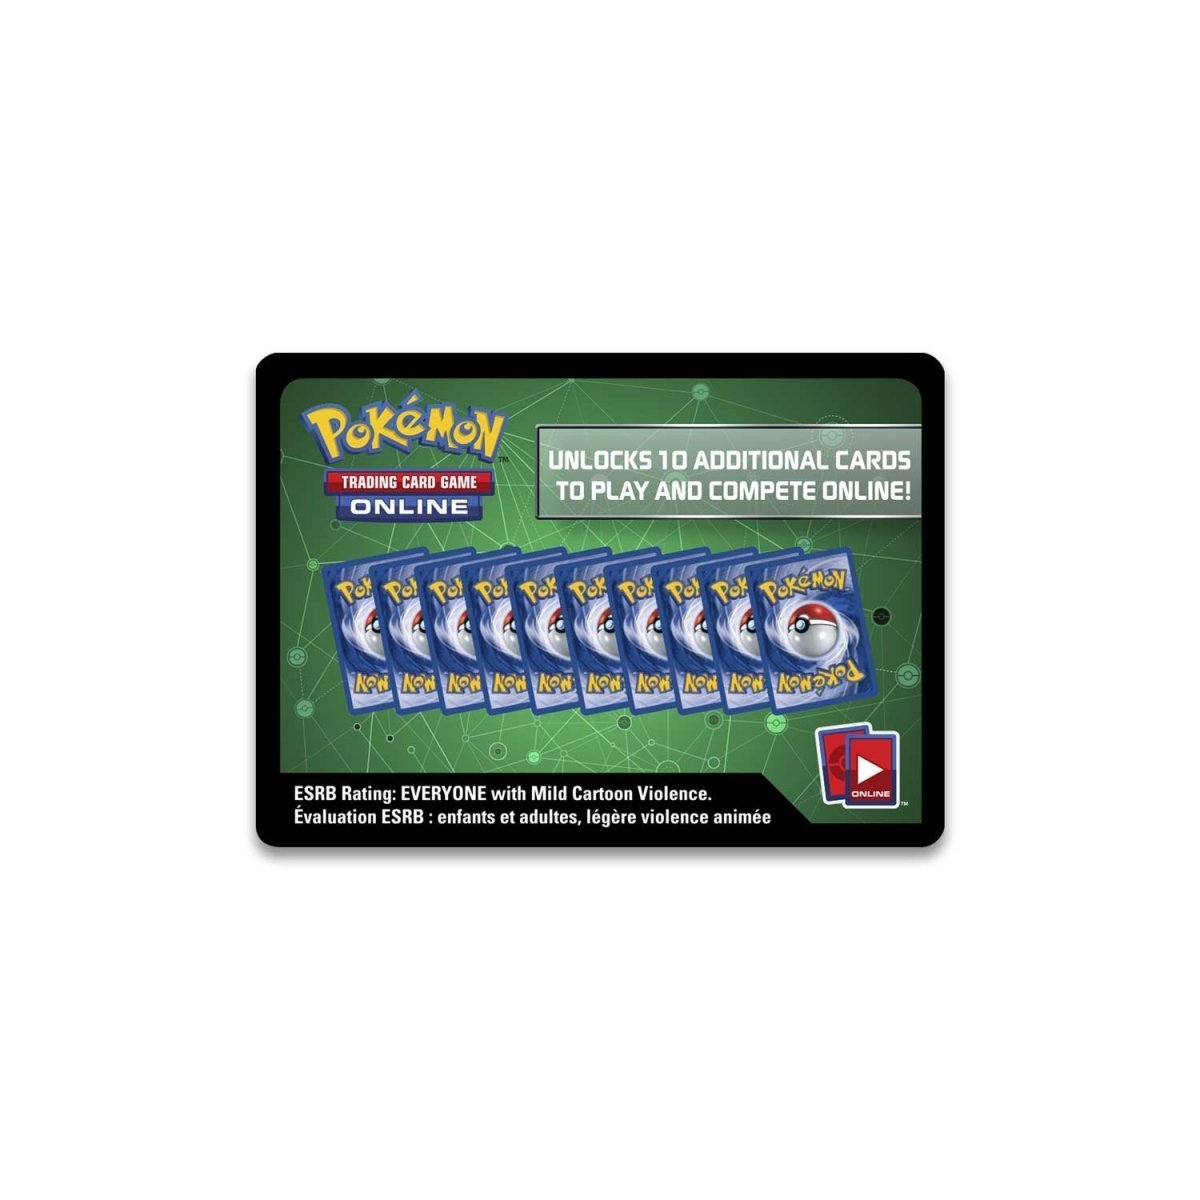 Pokemon Trainer's Toolkit 2021 820650808753 - King Card Canada